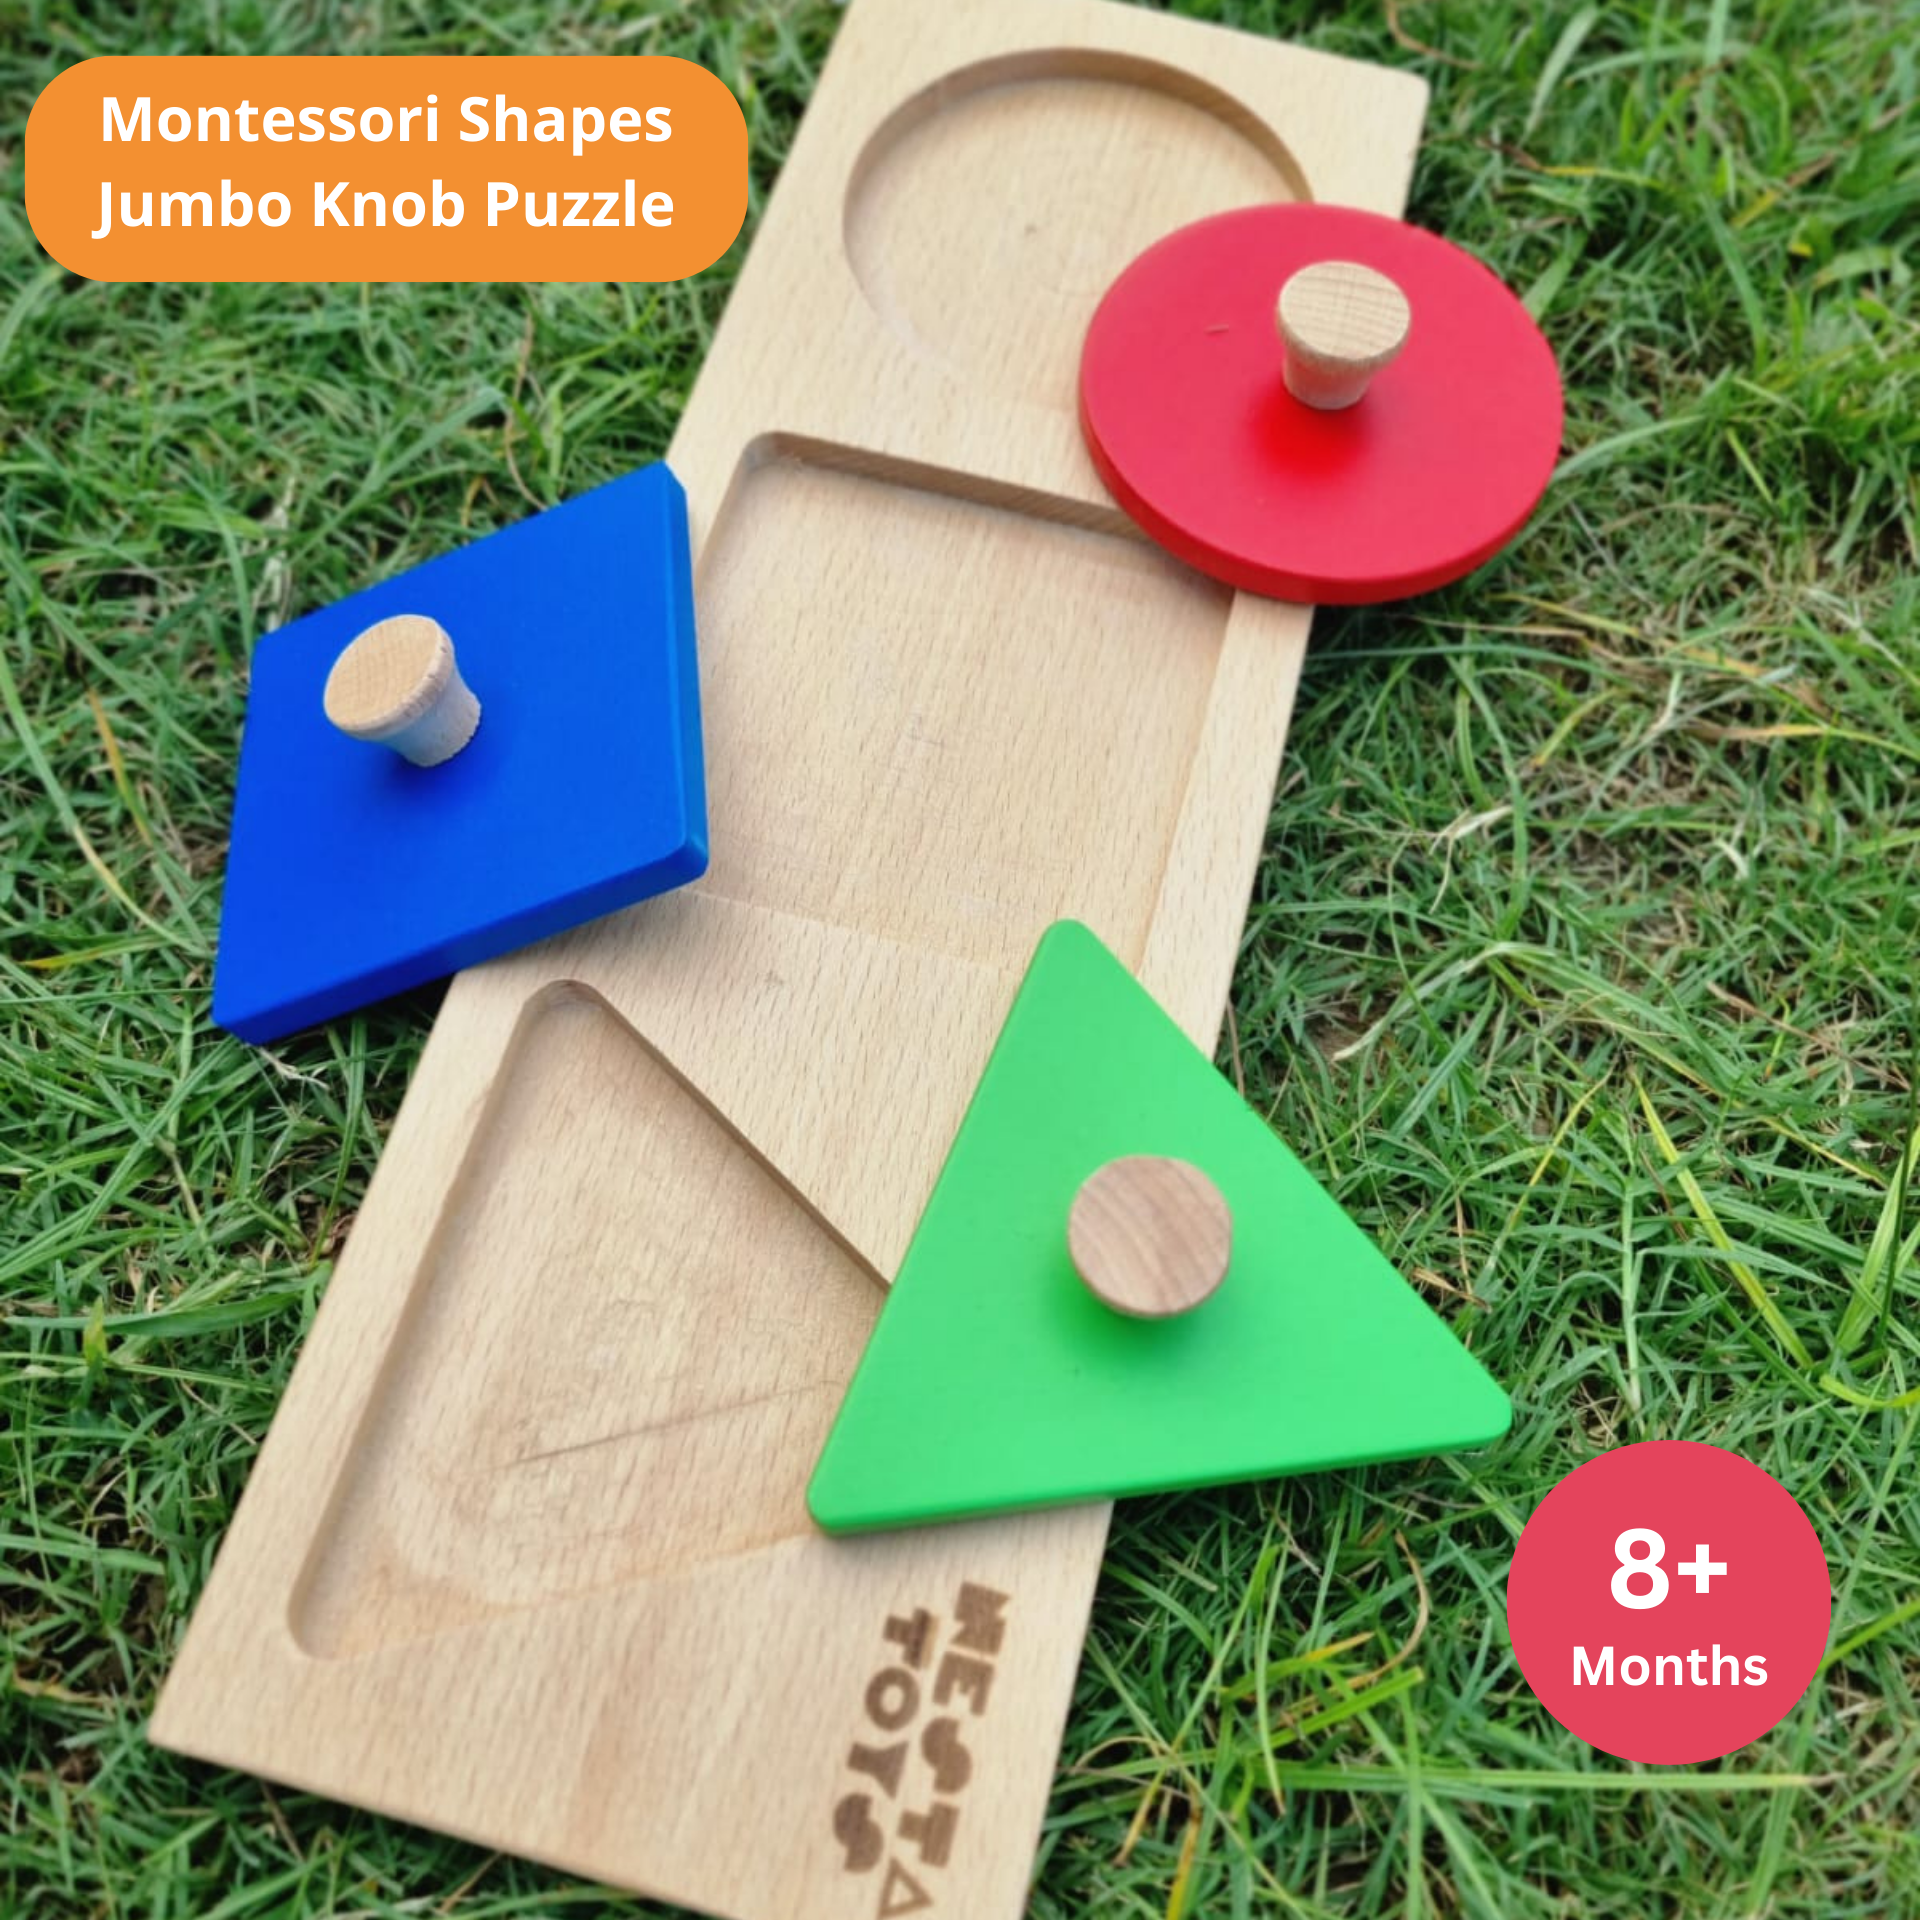 Montessori Early Math Puzzle Combo - Shapes & Circle Seriation | Educational Shapes Puzzles for Baby